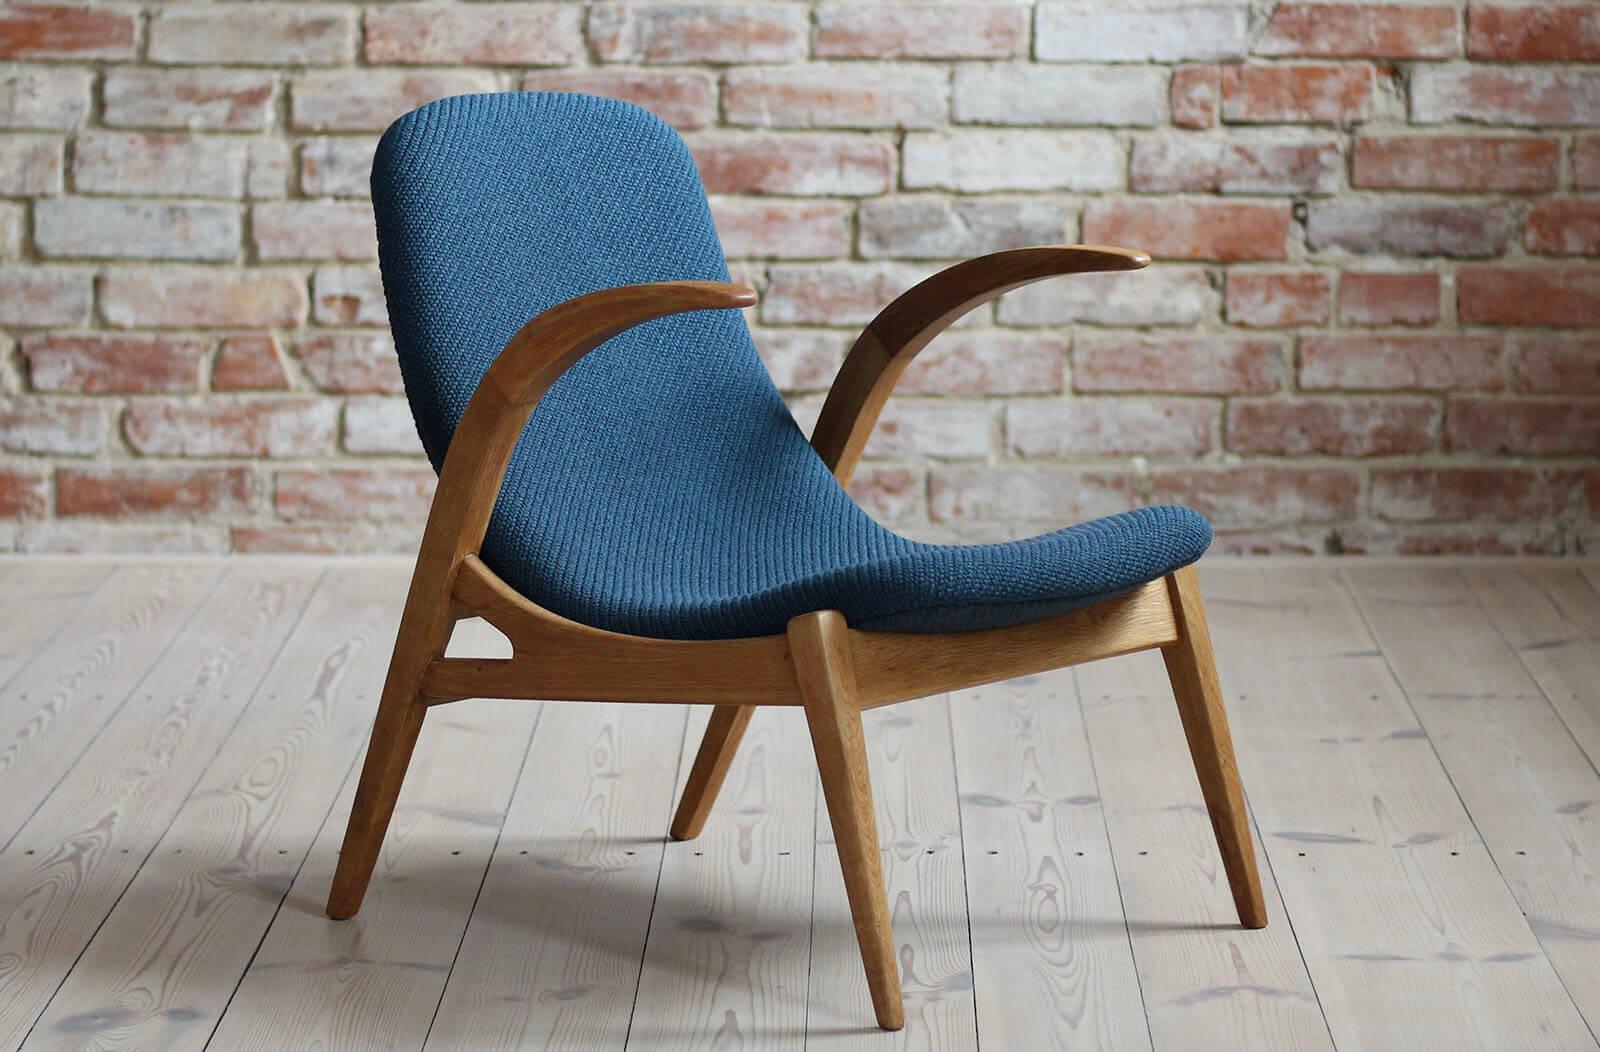 Mid-20th Century Set of 2 Midcentury Lounge Chairs, 1960s, Czech Republic